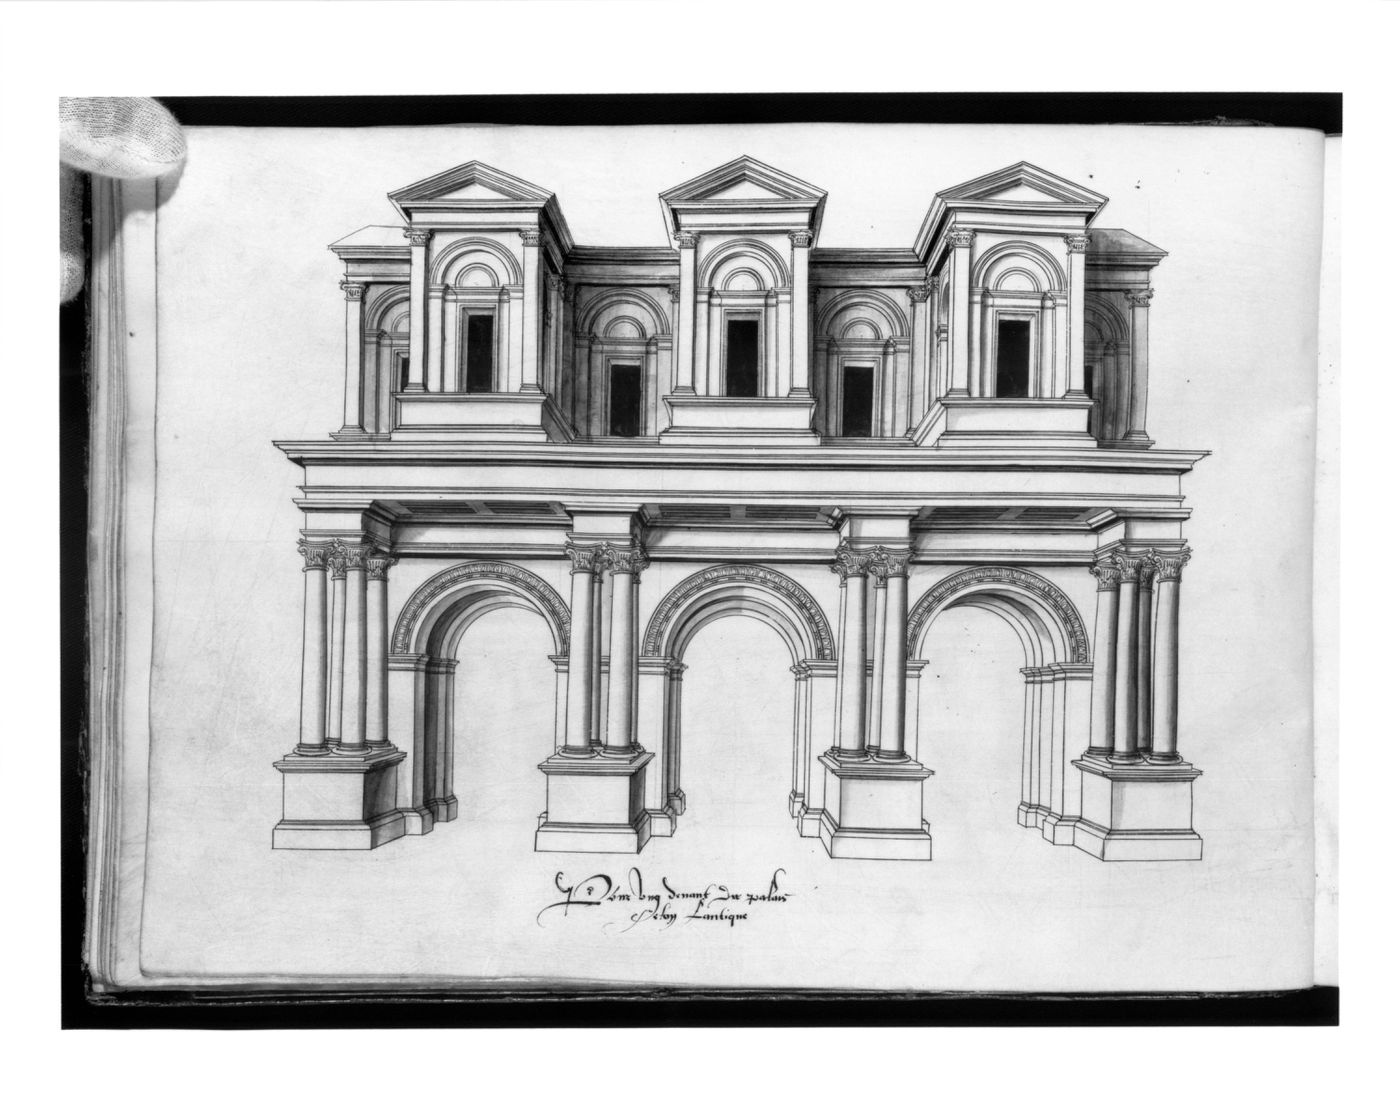 Design for a palace façade in the antique manner